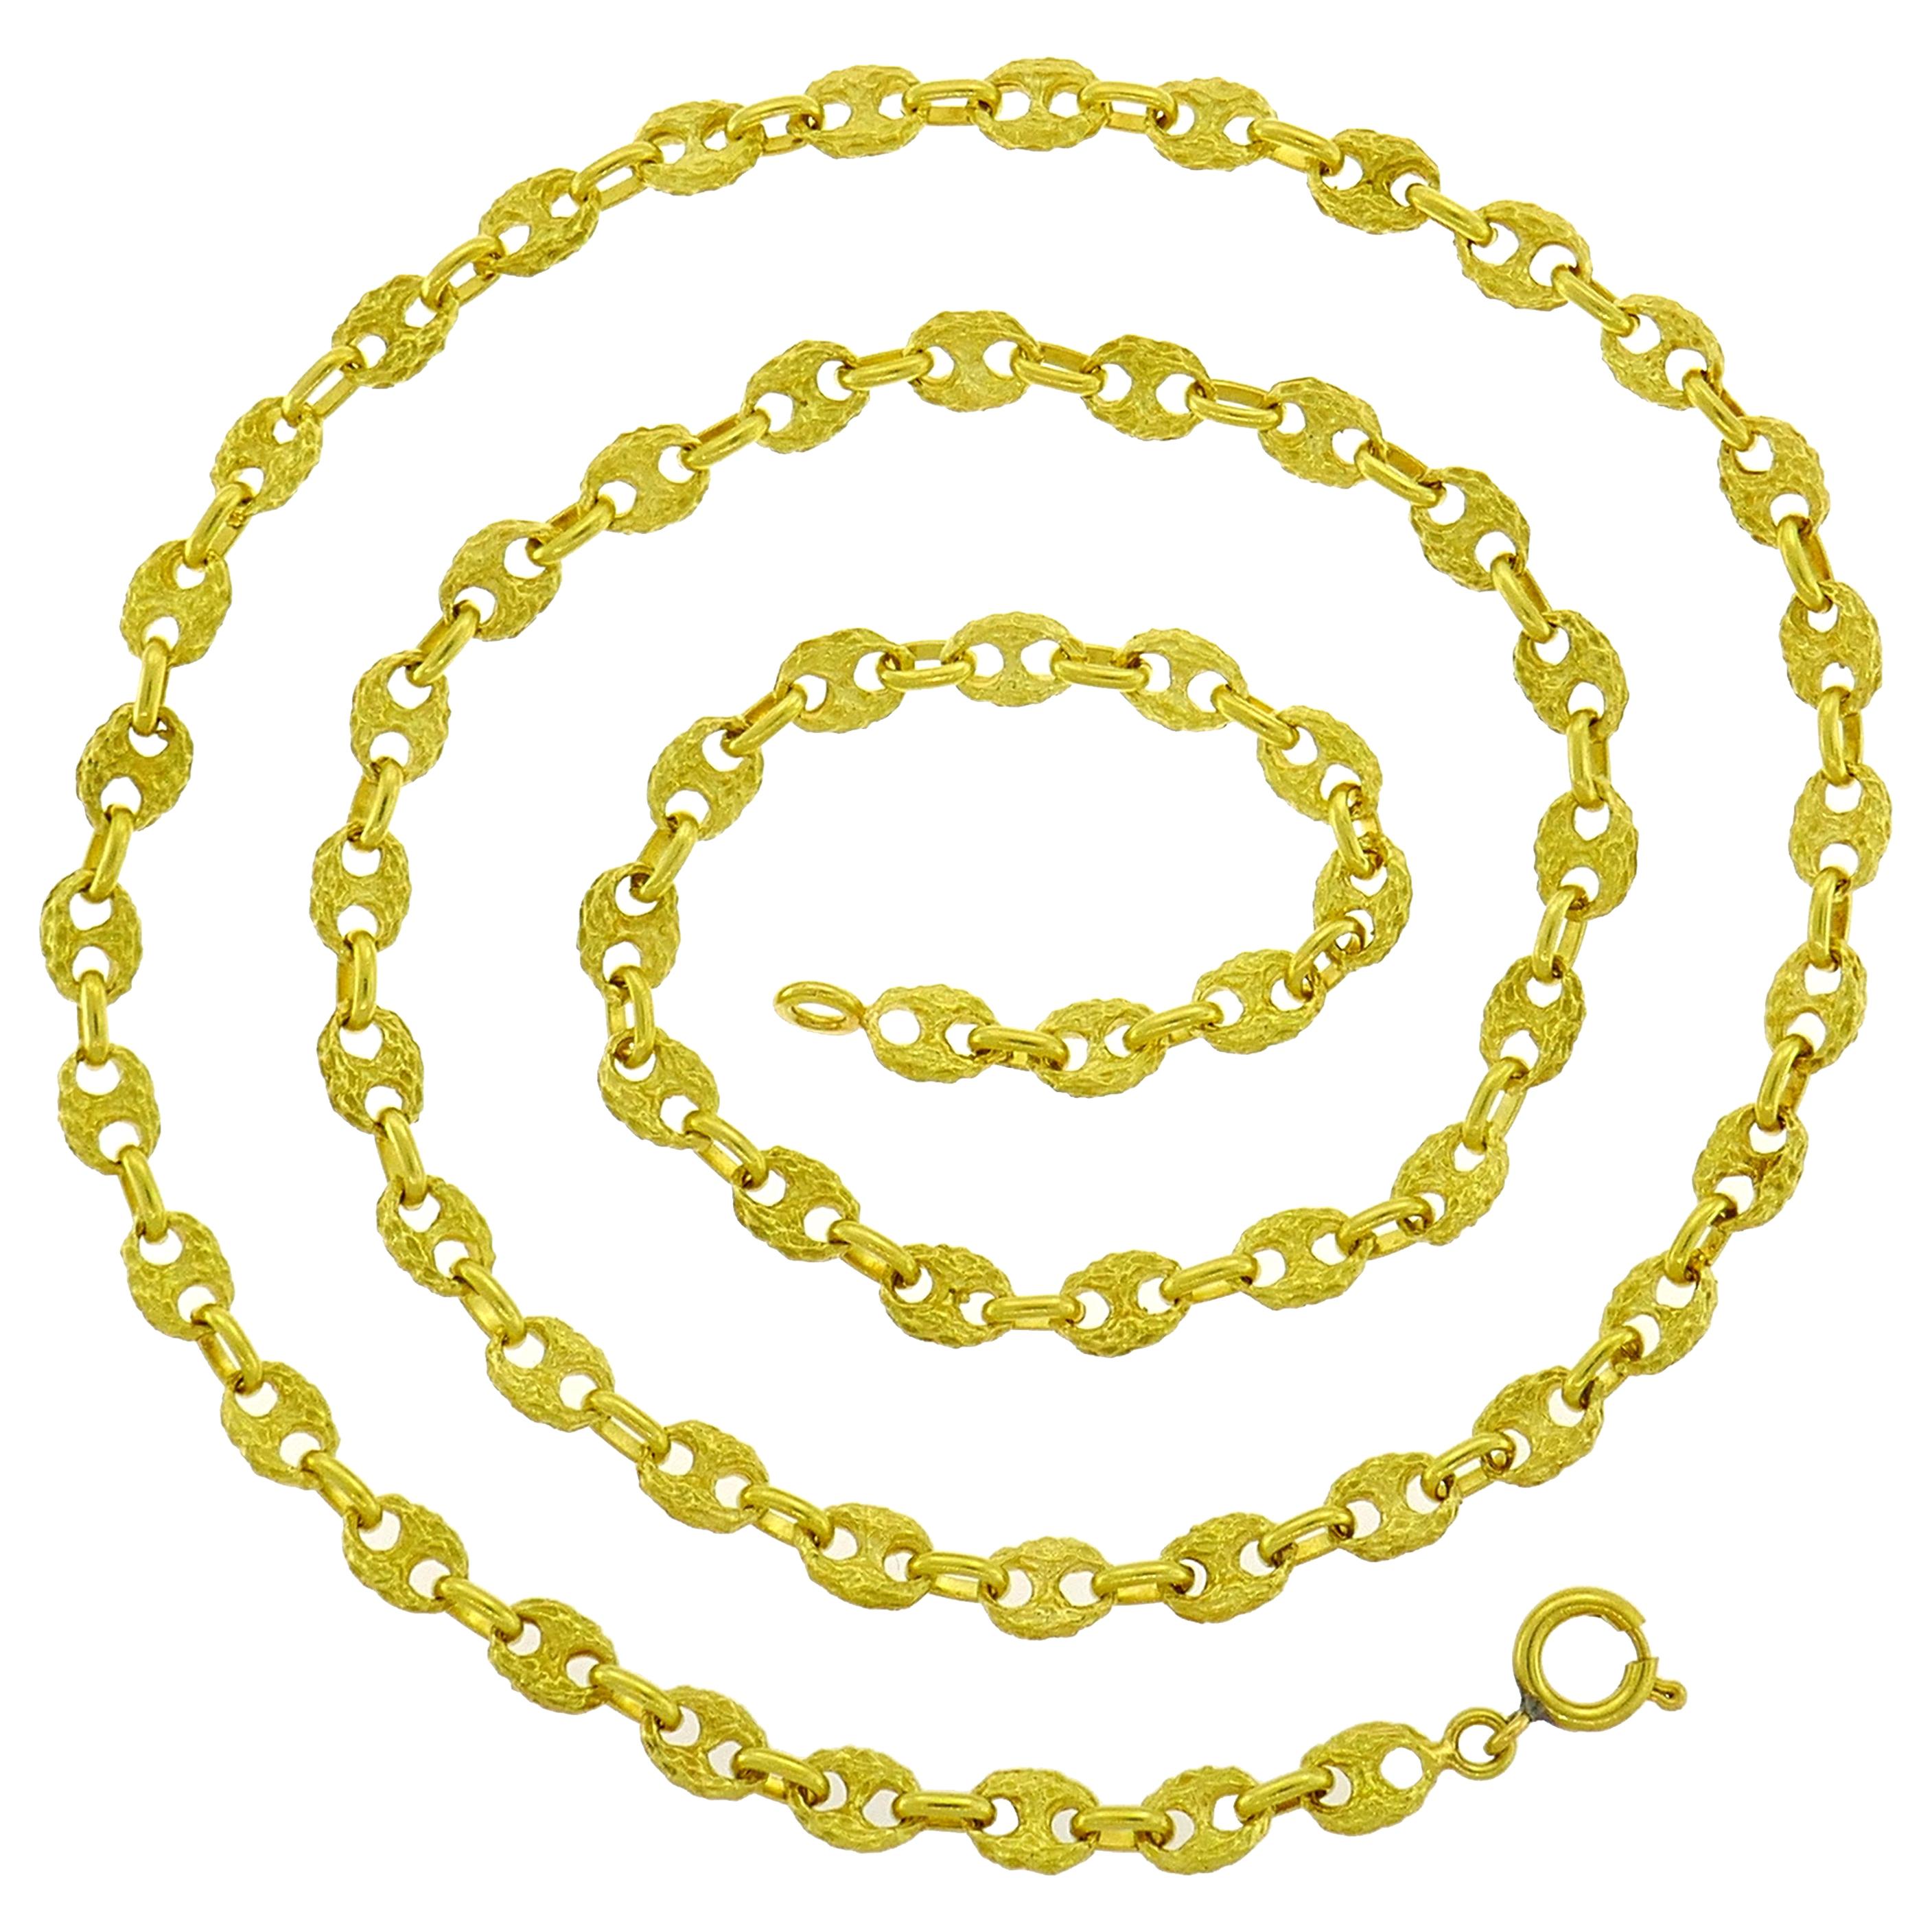 Yellow Gold Nautical Chain Necklace, 1970s